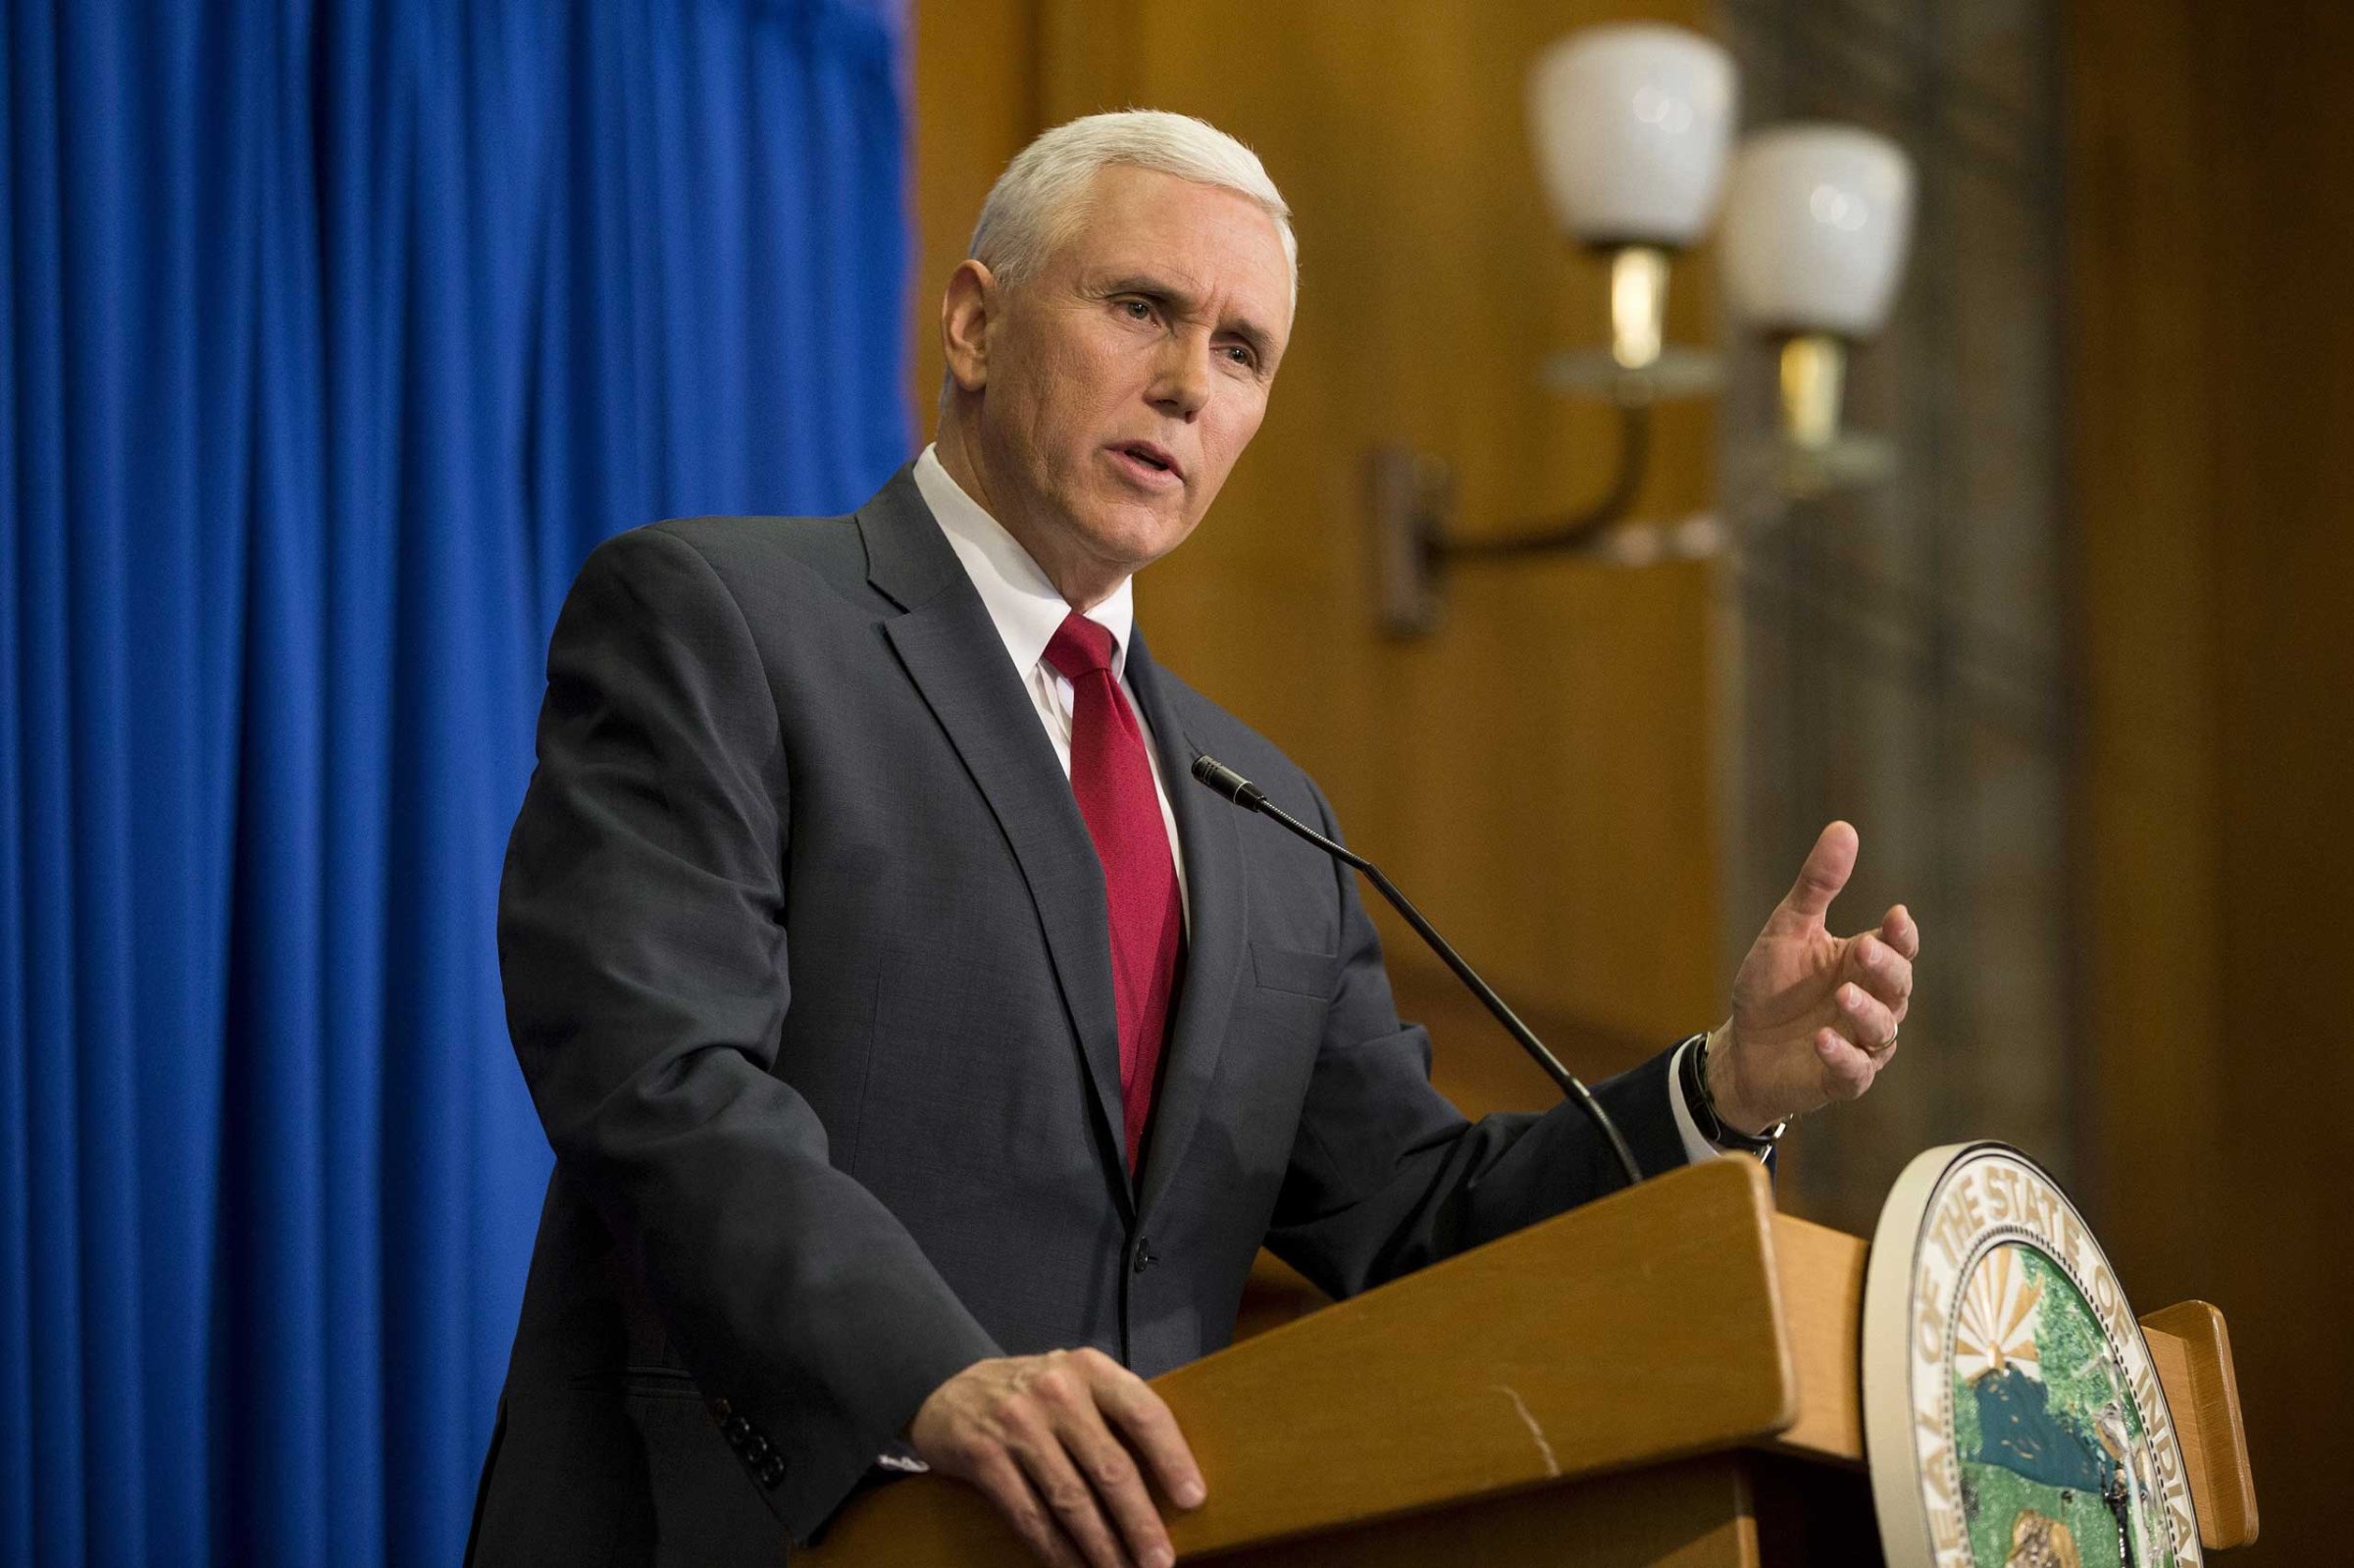 Indiana Gov. Mike Pence speaks during a press conference at the Indiana State Library in Indianapolis on March 31, 2015.